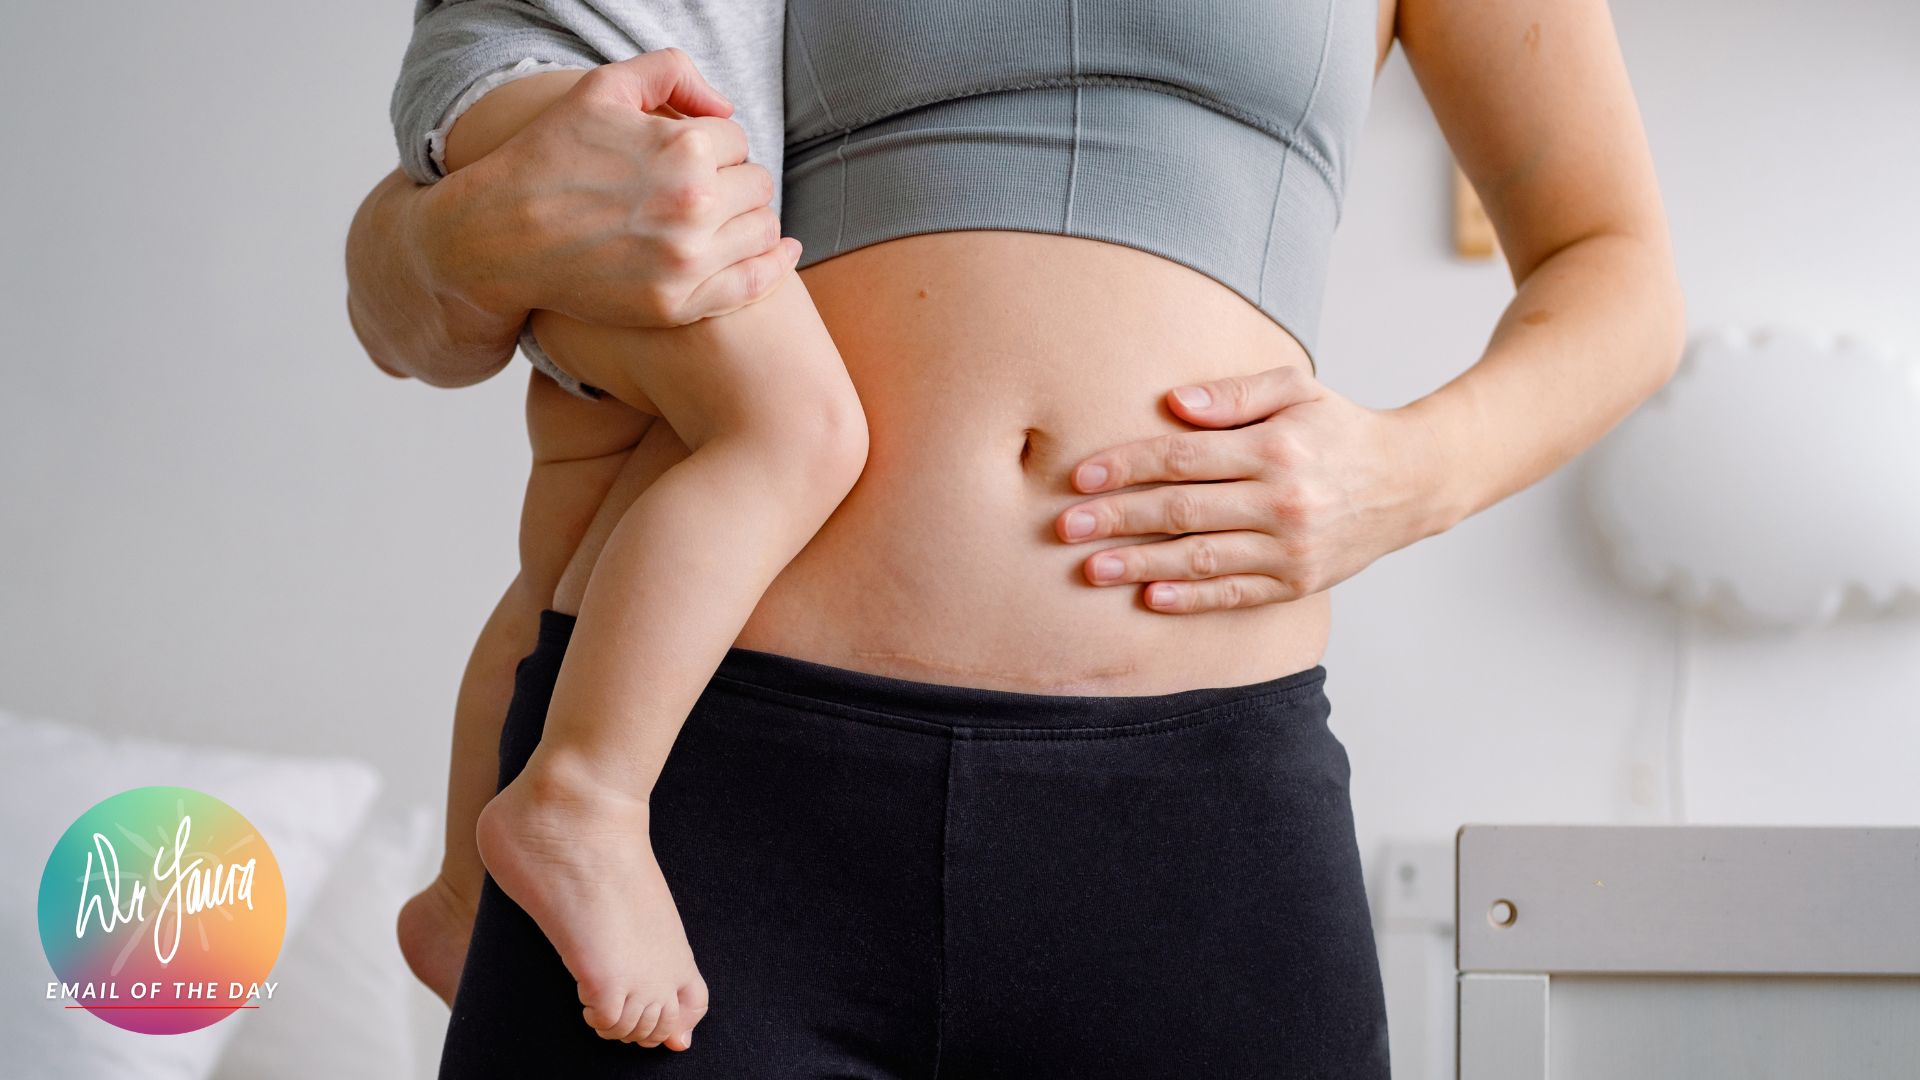 Woman's torso is displayed while one hand is placed on her belly and the other holds a toddler on her hip